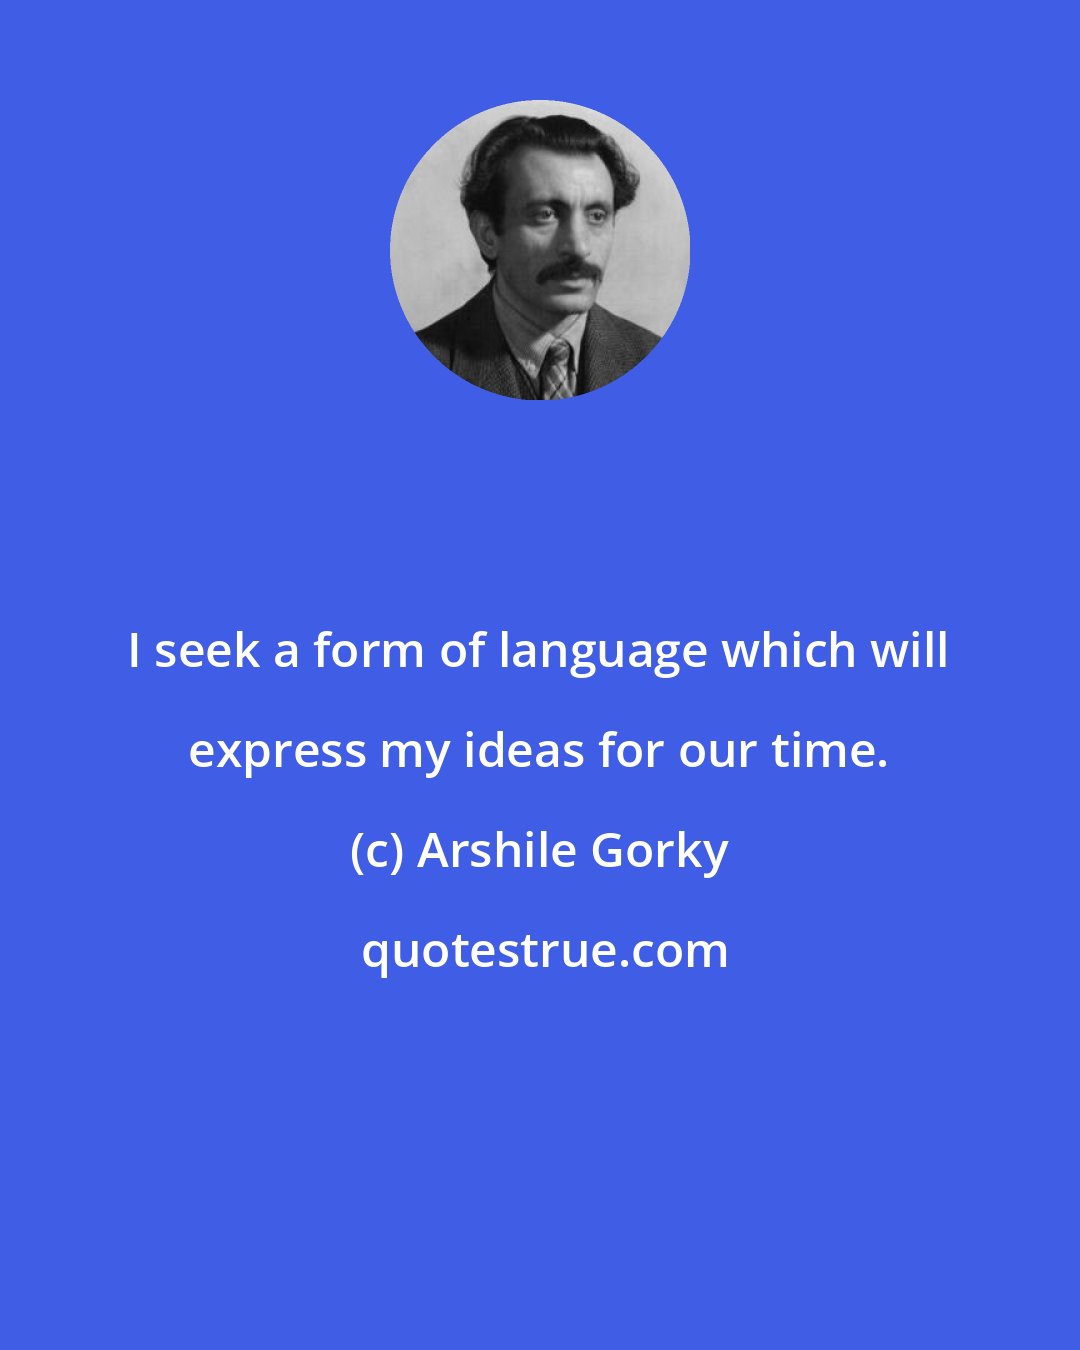 Arshile Gorky: I seek a form of language which will express my ideas for our time.